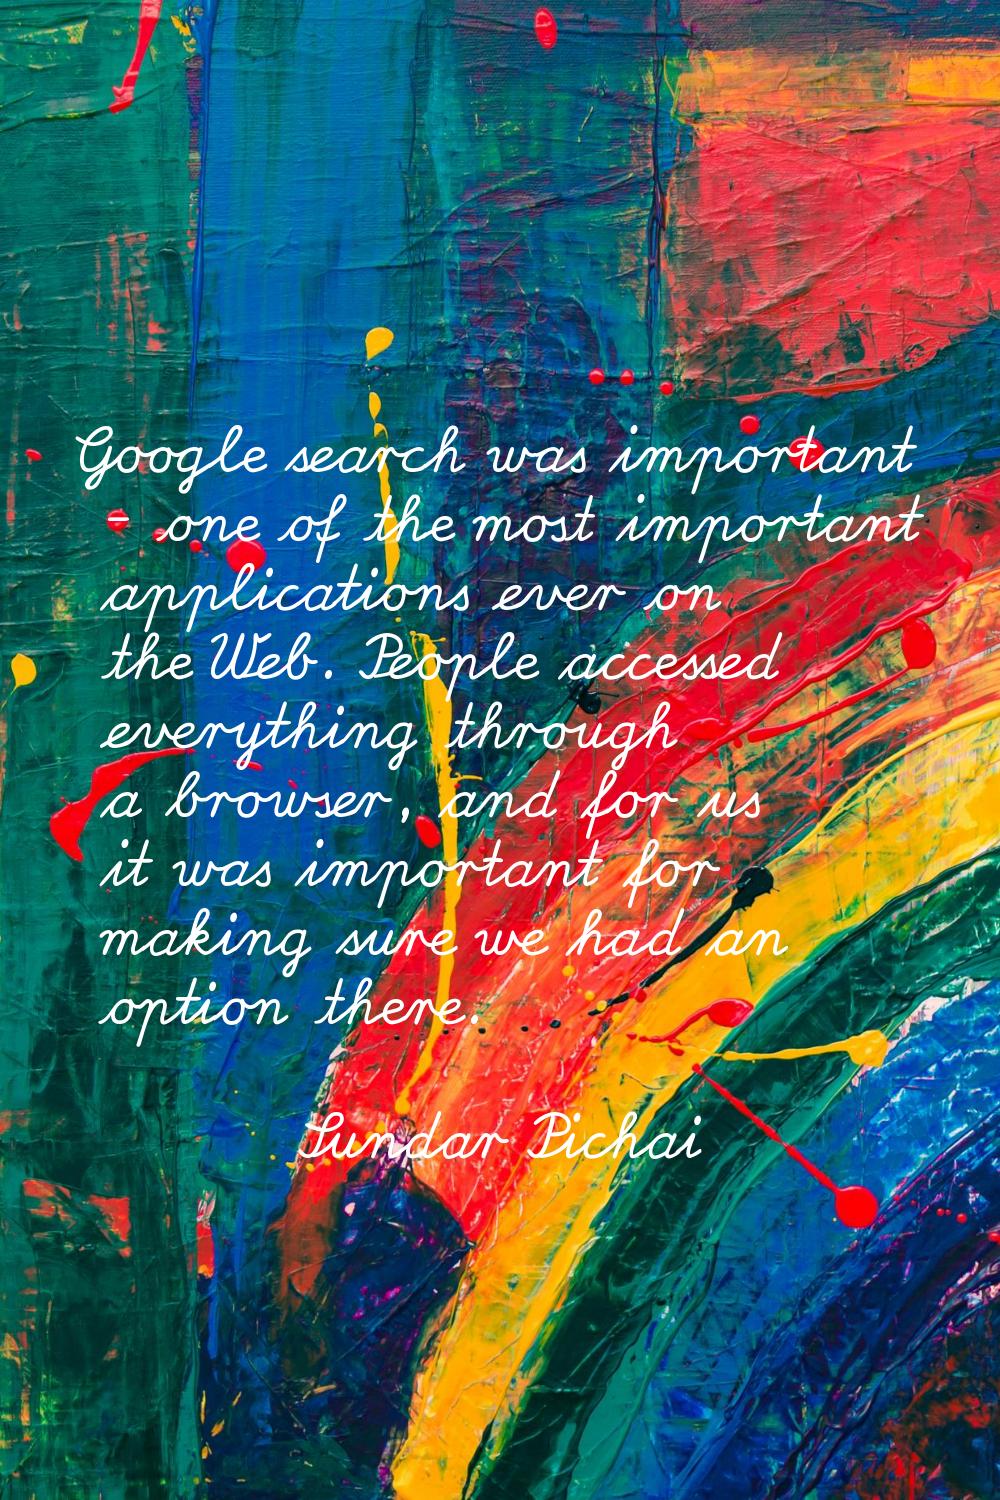 Google search was important - one of the most important applications ever on the Web. People access